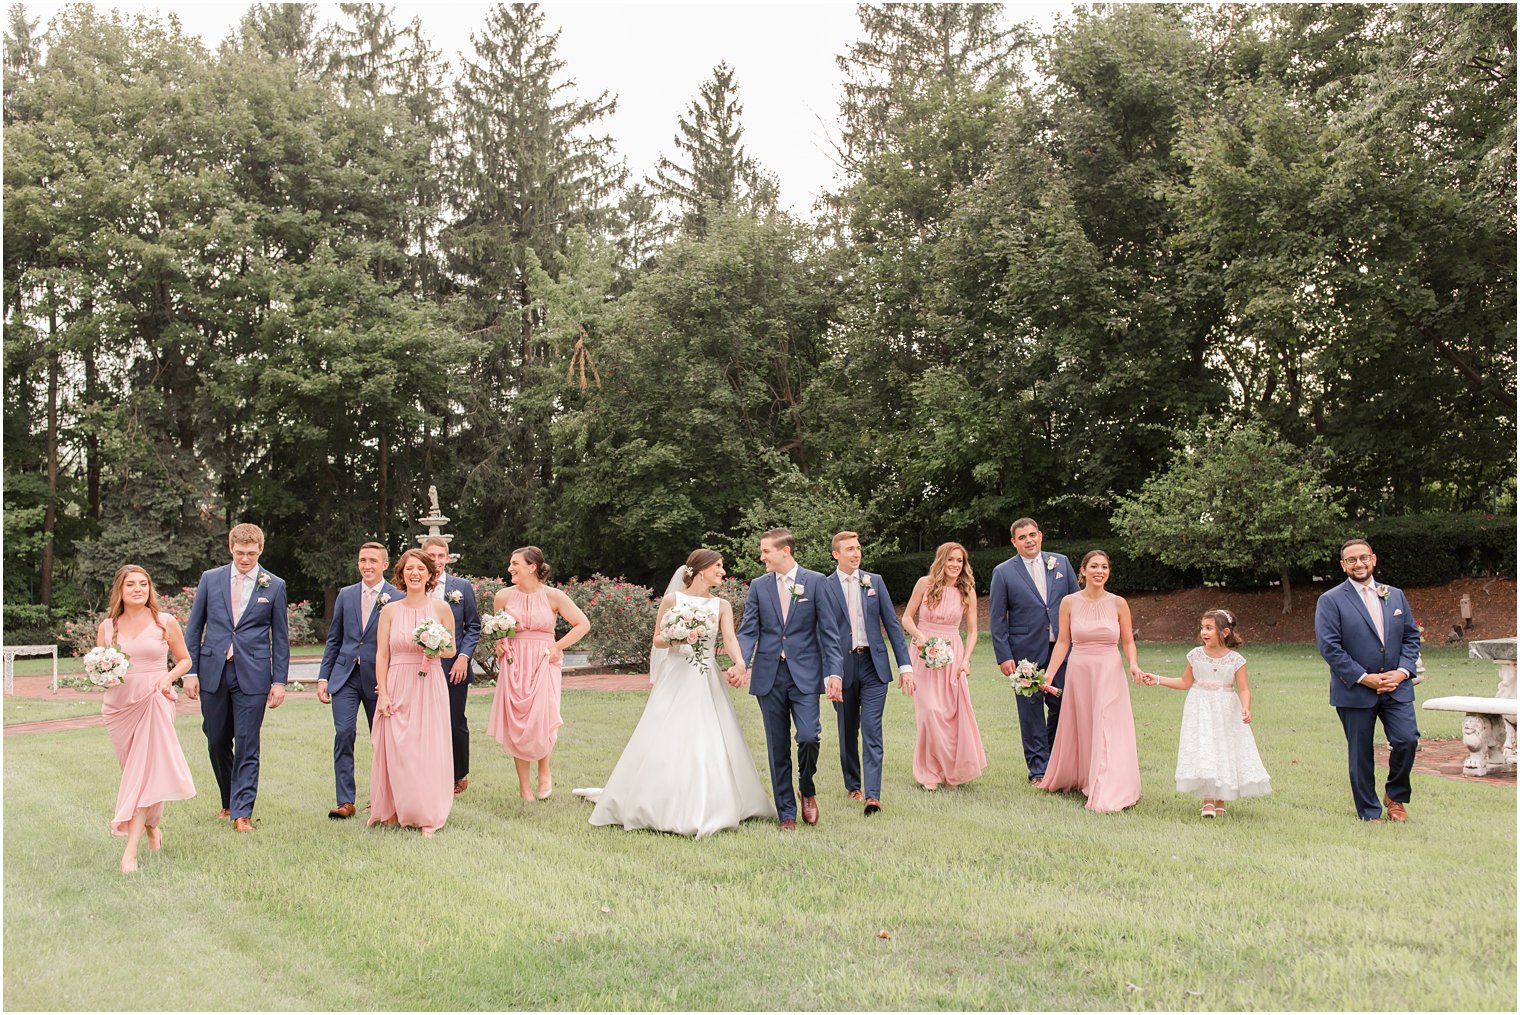 Candid photo of bridal party walking on the grounds of The Manor in West Orange NJ